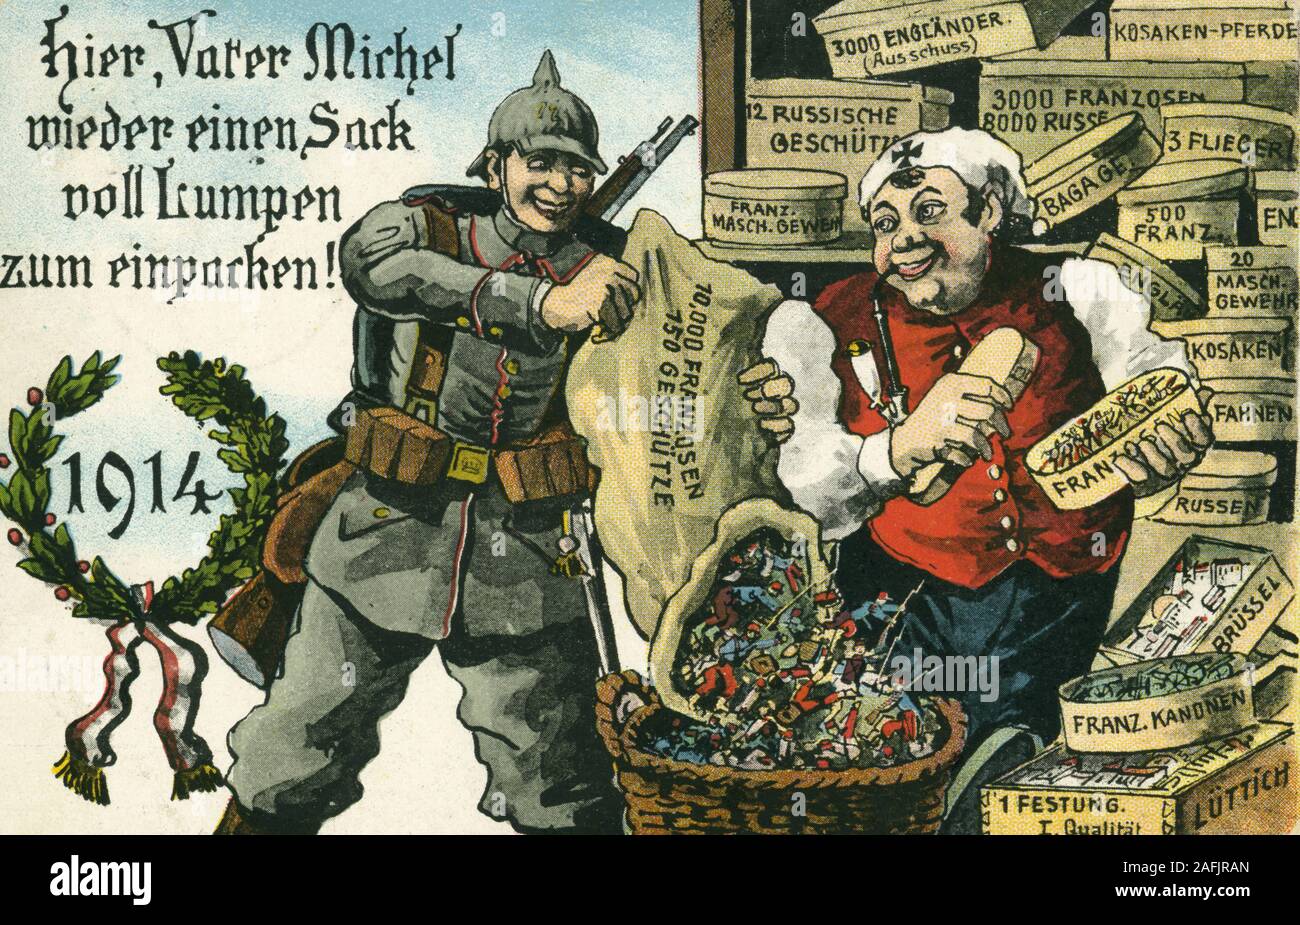 Postcard 'Hier, Vater Michel, wieder einen Sack voll Lumpen zum einpacken!' (Here, father Michel, a bag with rags for boxing again) from 1914 shows a man with pipe and soldier with a bag of figures. Stock Photo